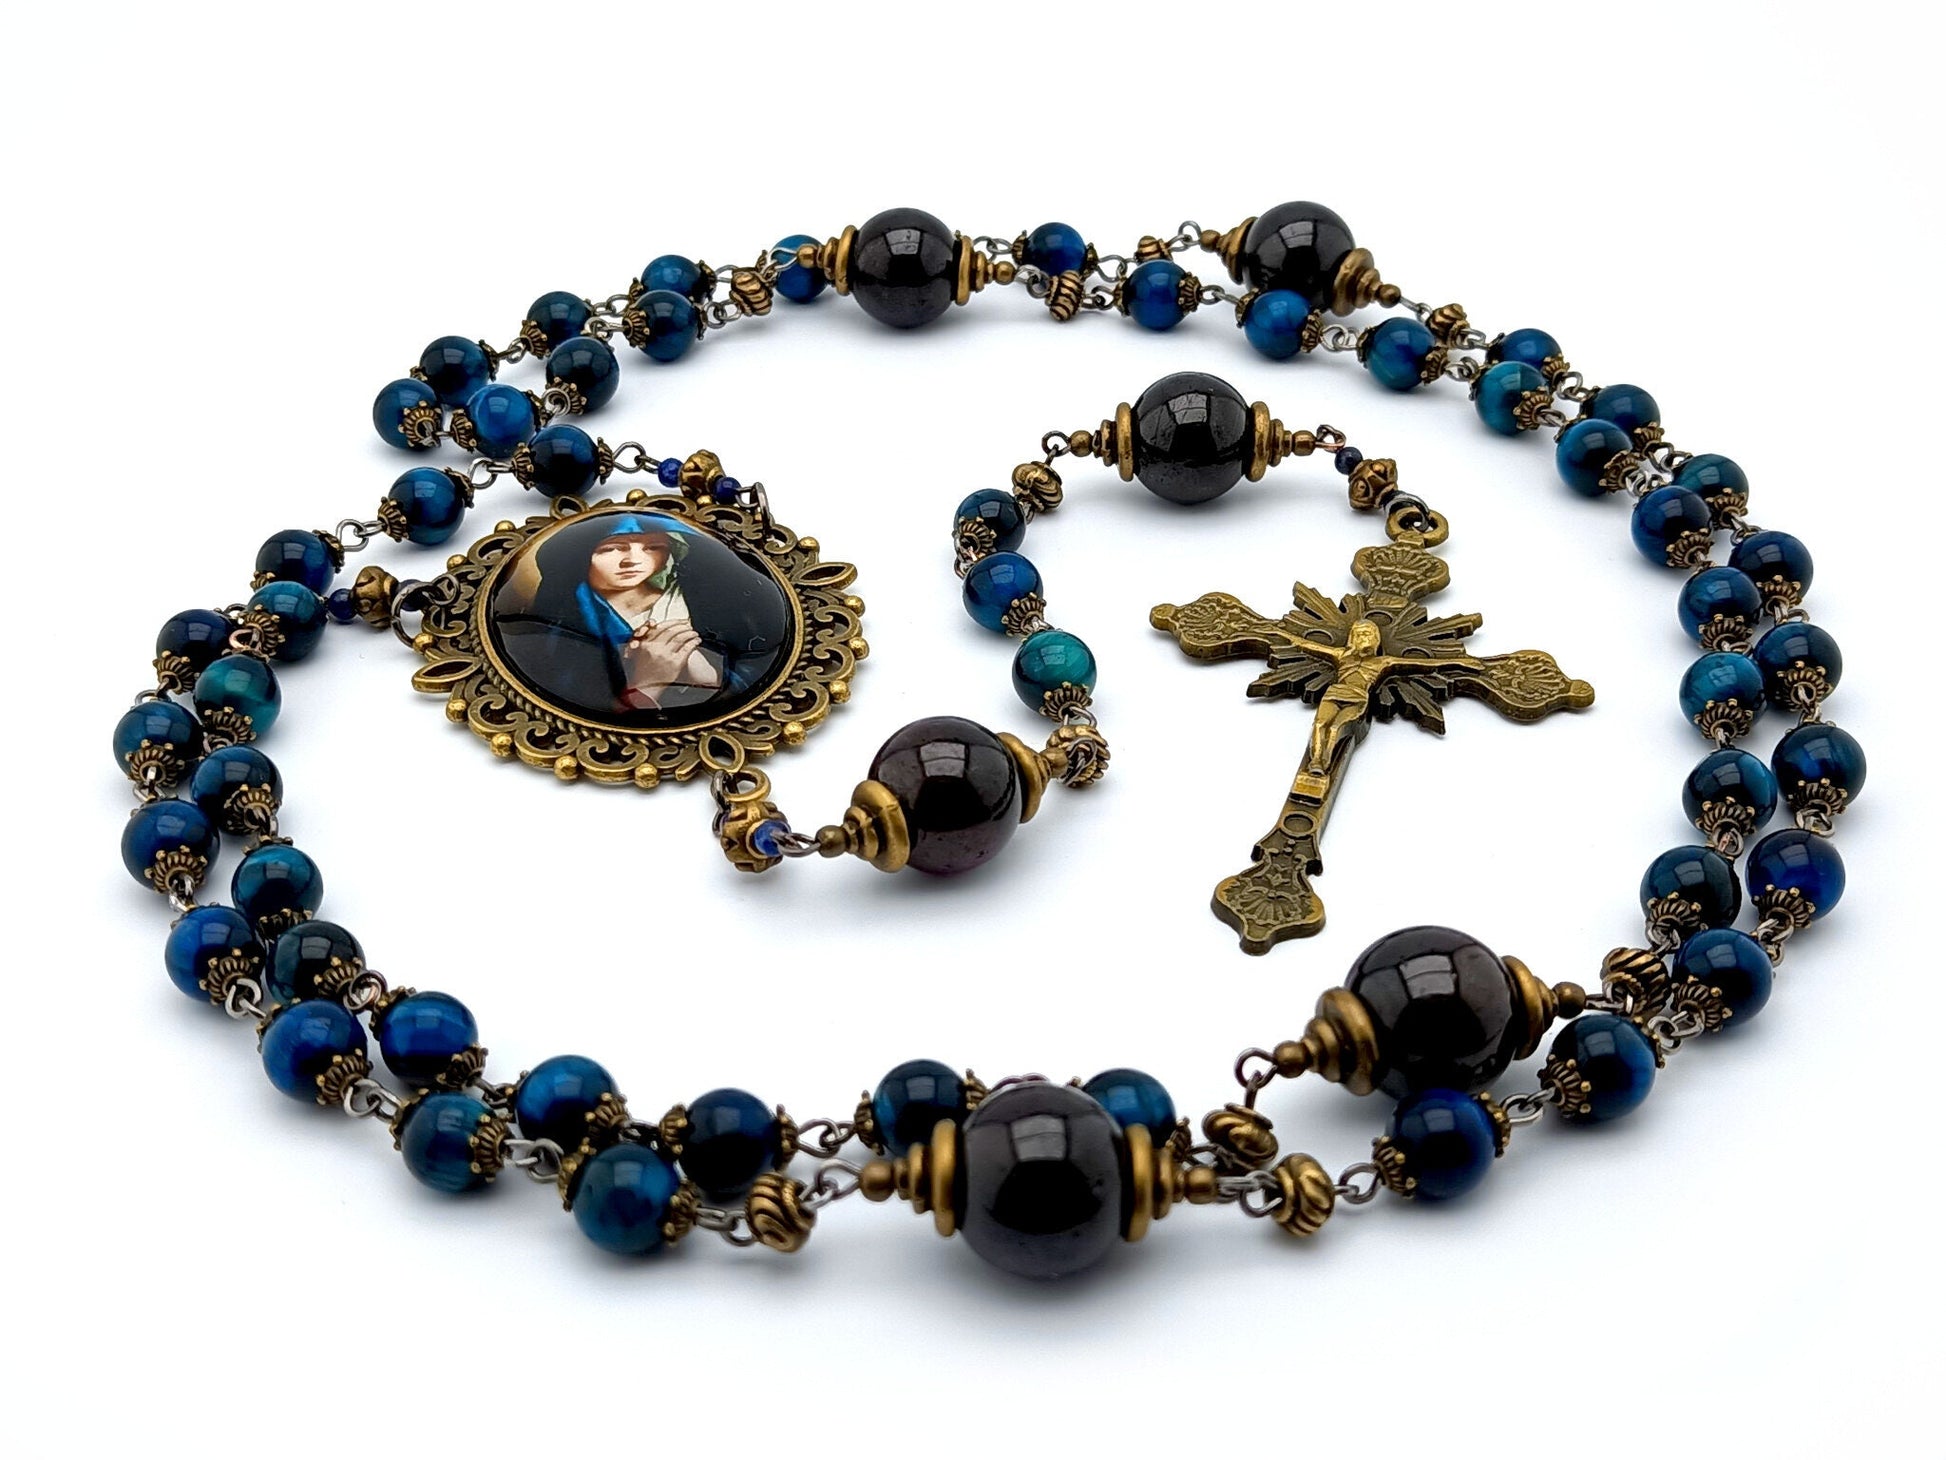 Our Lady unique rosary beads with blue tigers eye gemstone beads, brass sunburst crucifix, garnet pater beads and large brass picture centre medal.